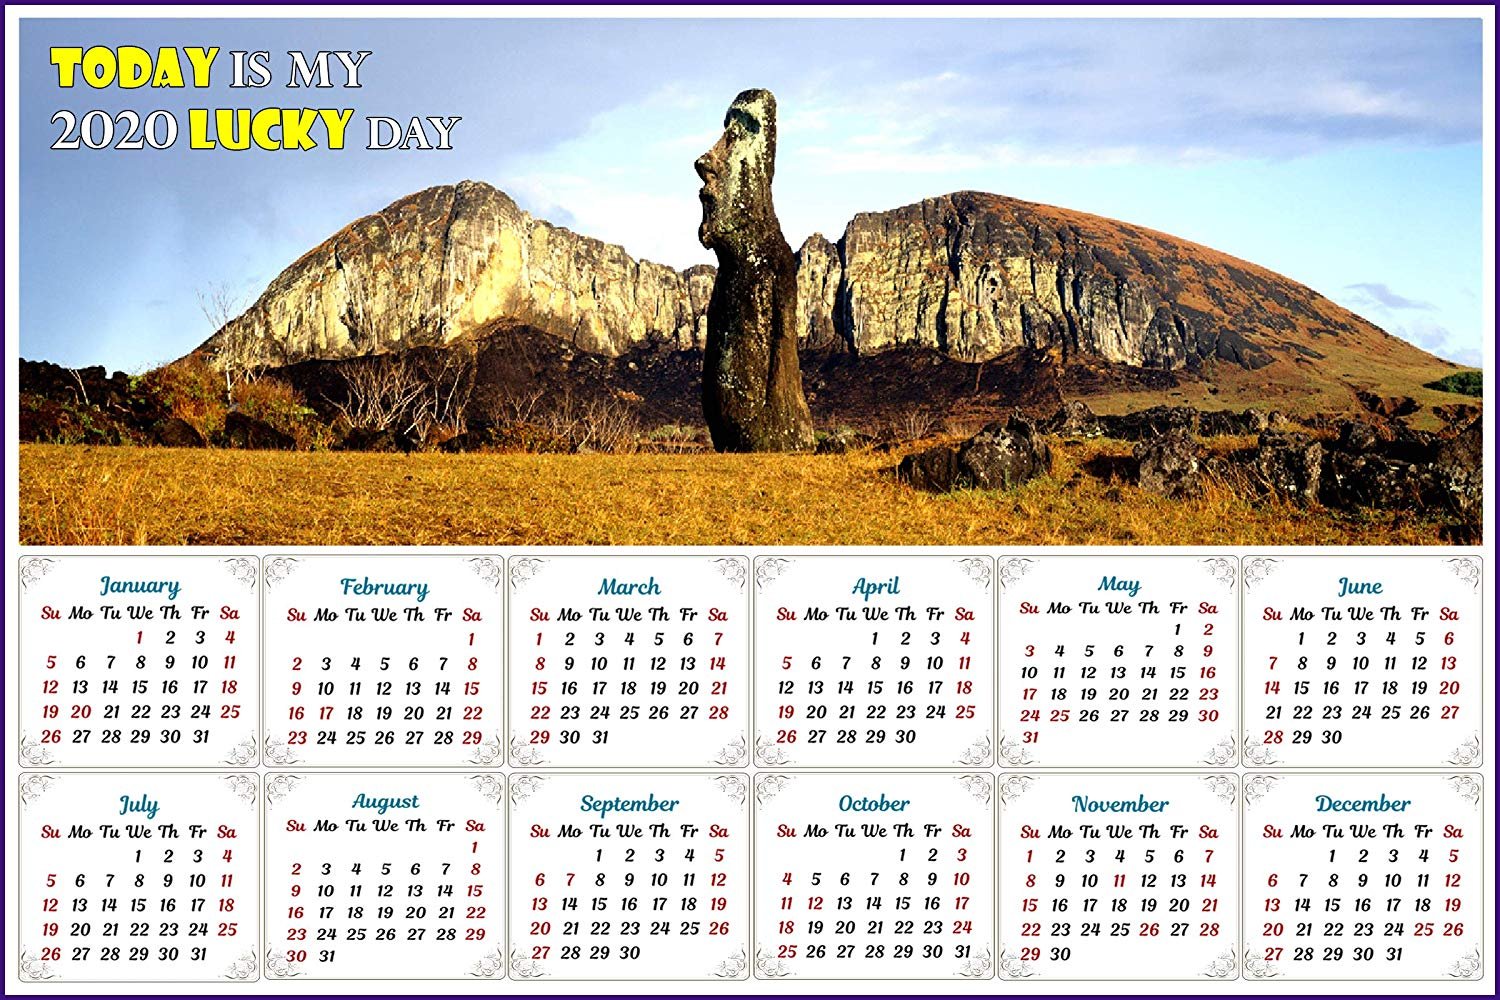 2020 Magnetic Calendar - Calendar Magnets - Today is my Lucky Day (Easter Island Beauty)